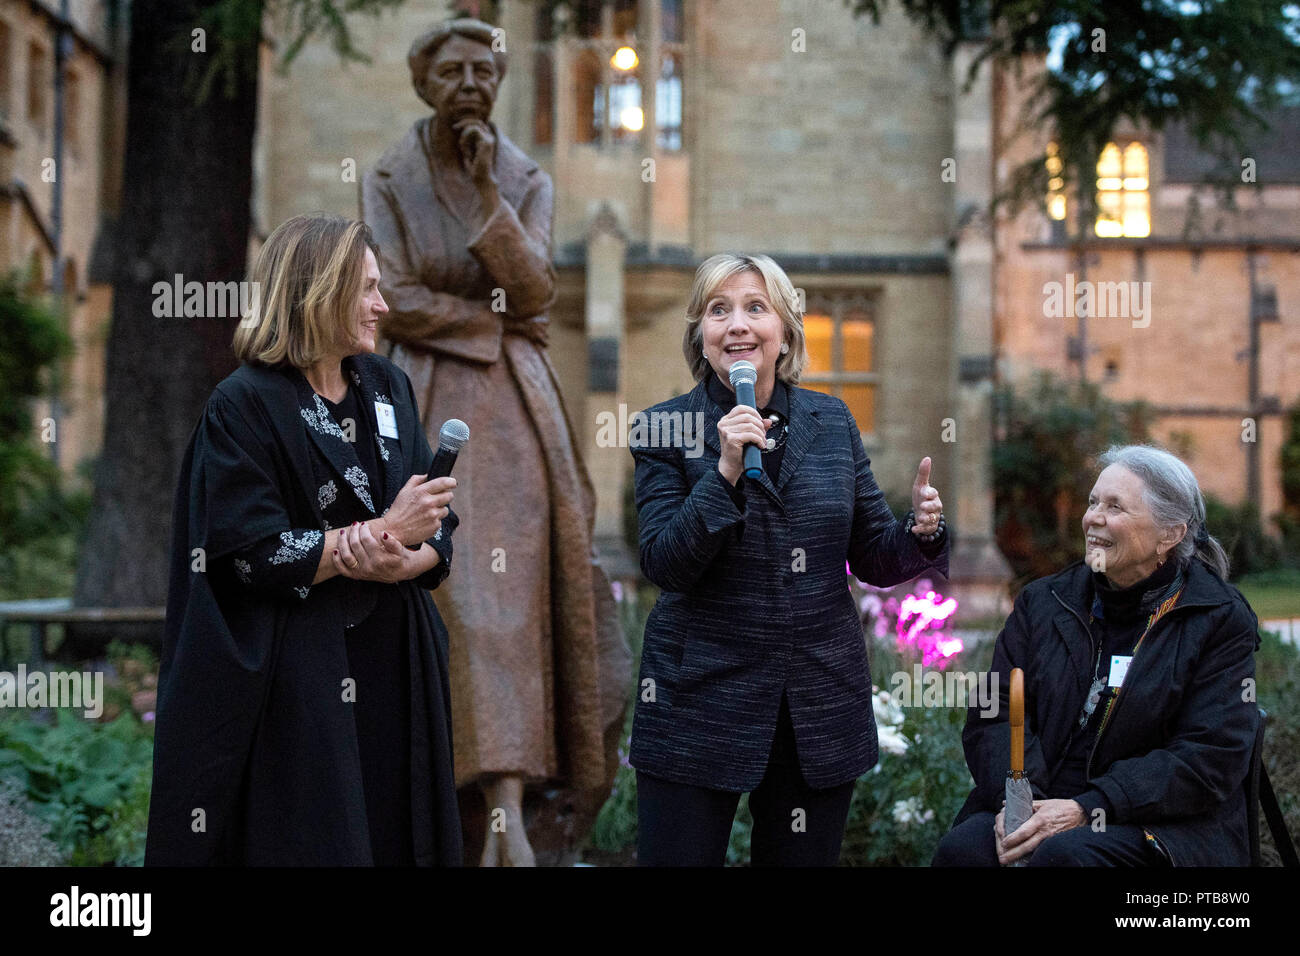 The statue of Eleanor Roosevelt is unveiled by Hillary Rodham Clinton (centre) with Helen Mountfield, Principle of Mansfield College, and Penelope Jencks, the artist that created the statue outside the Bonavero Institute in Oxford on the 70th anniversary of the Universal Declaration of Human Rights. Stock Photo